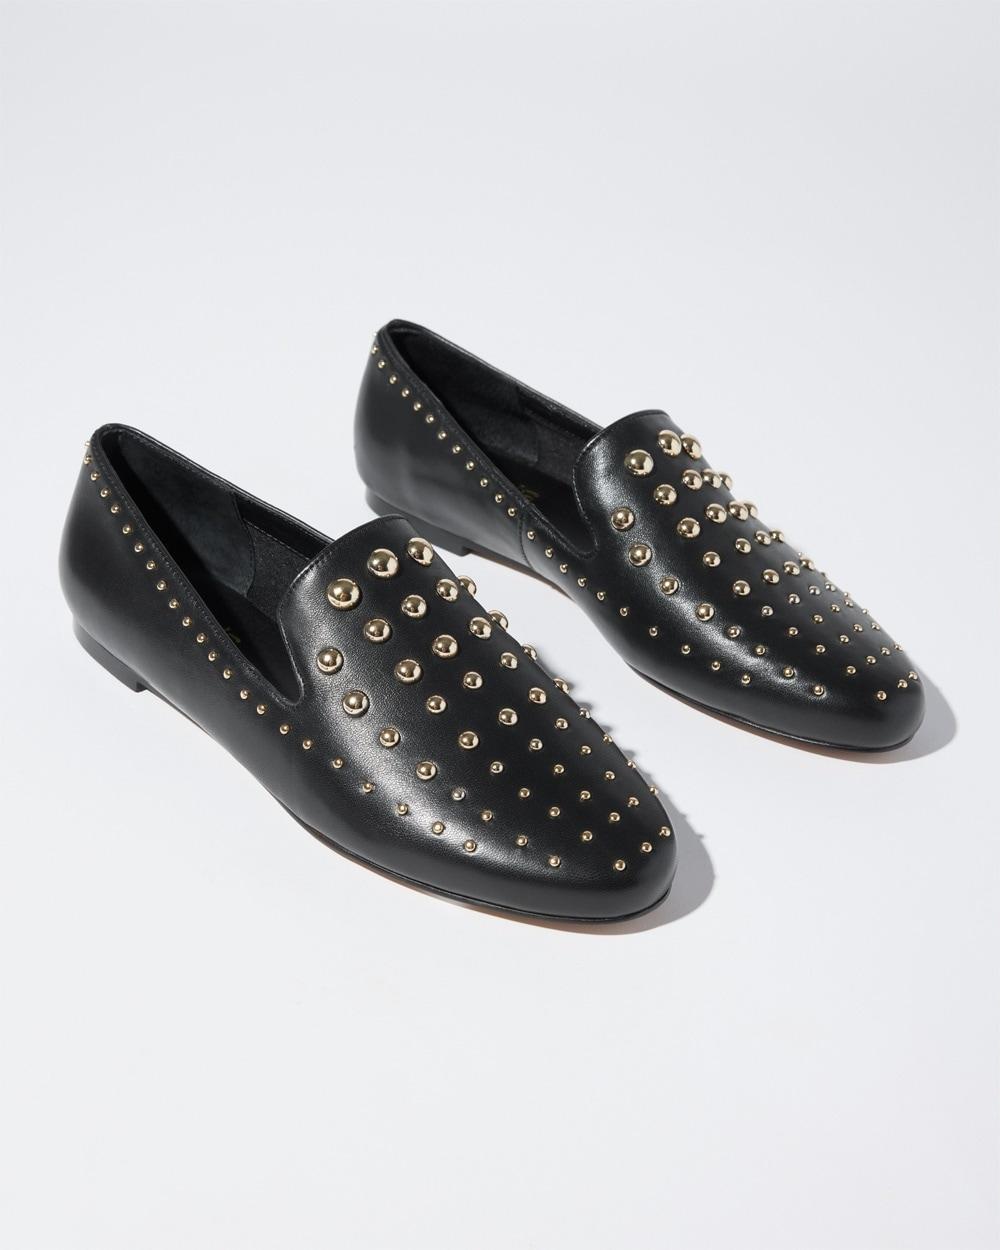 Chico's Studded Leather Loafers Product Image